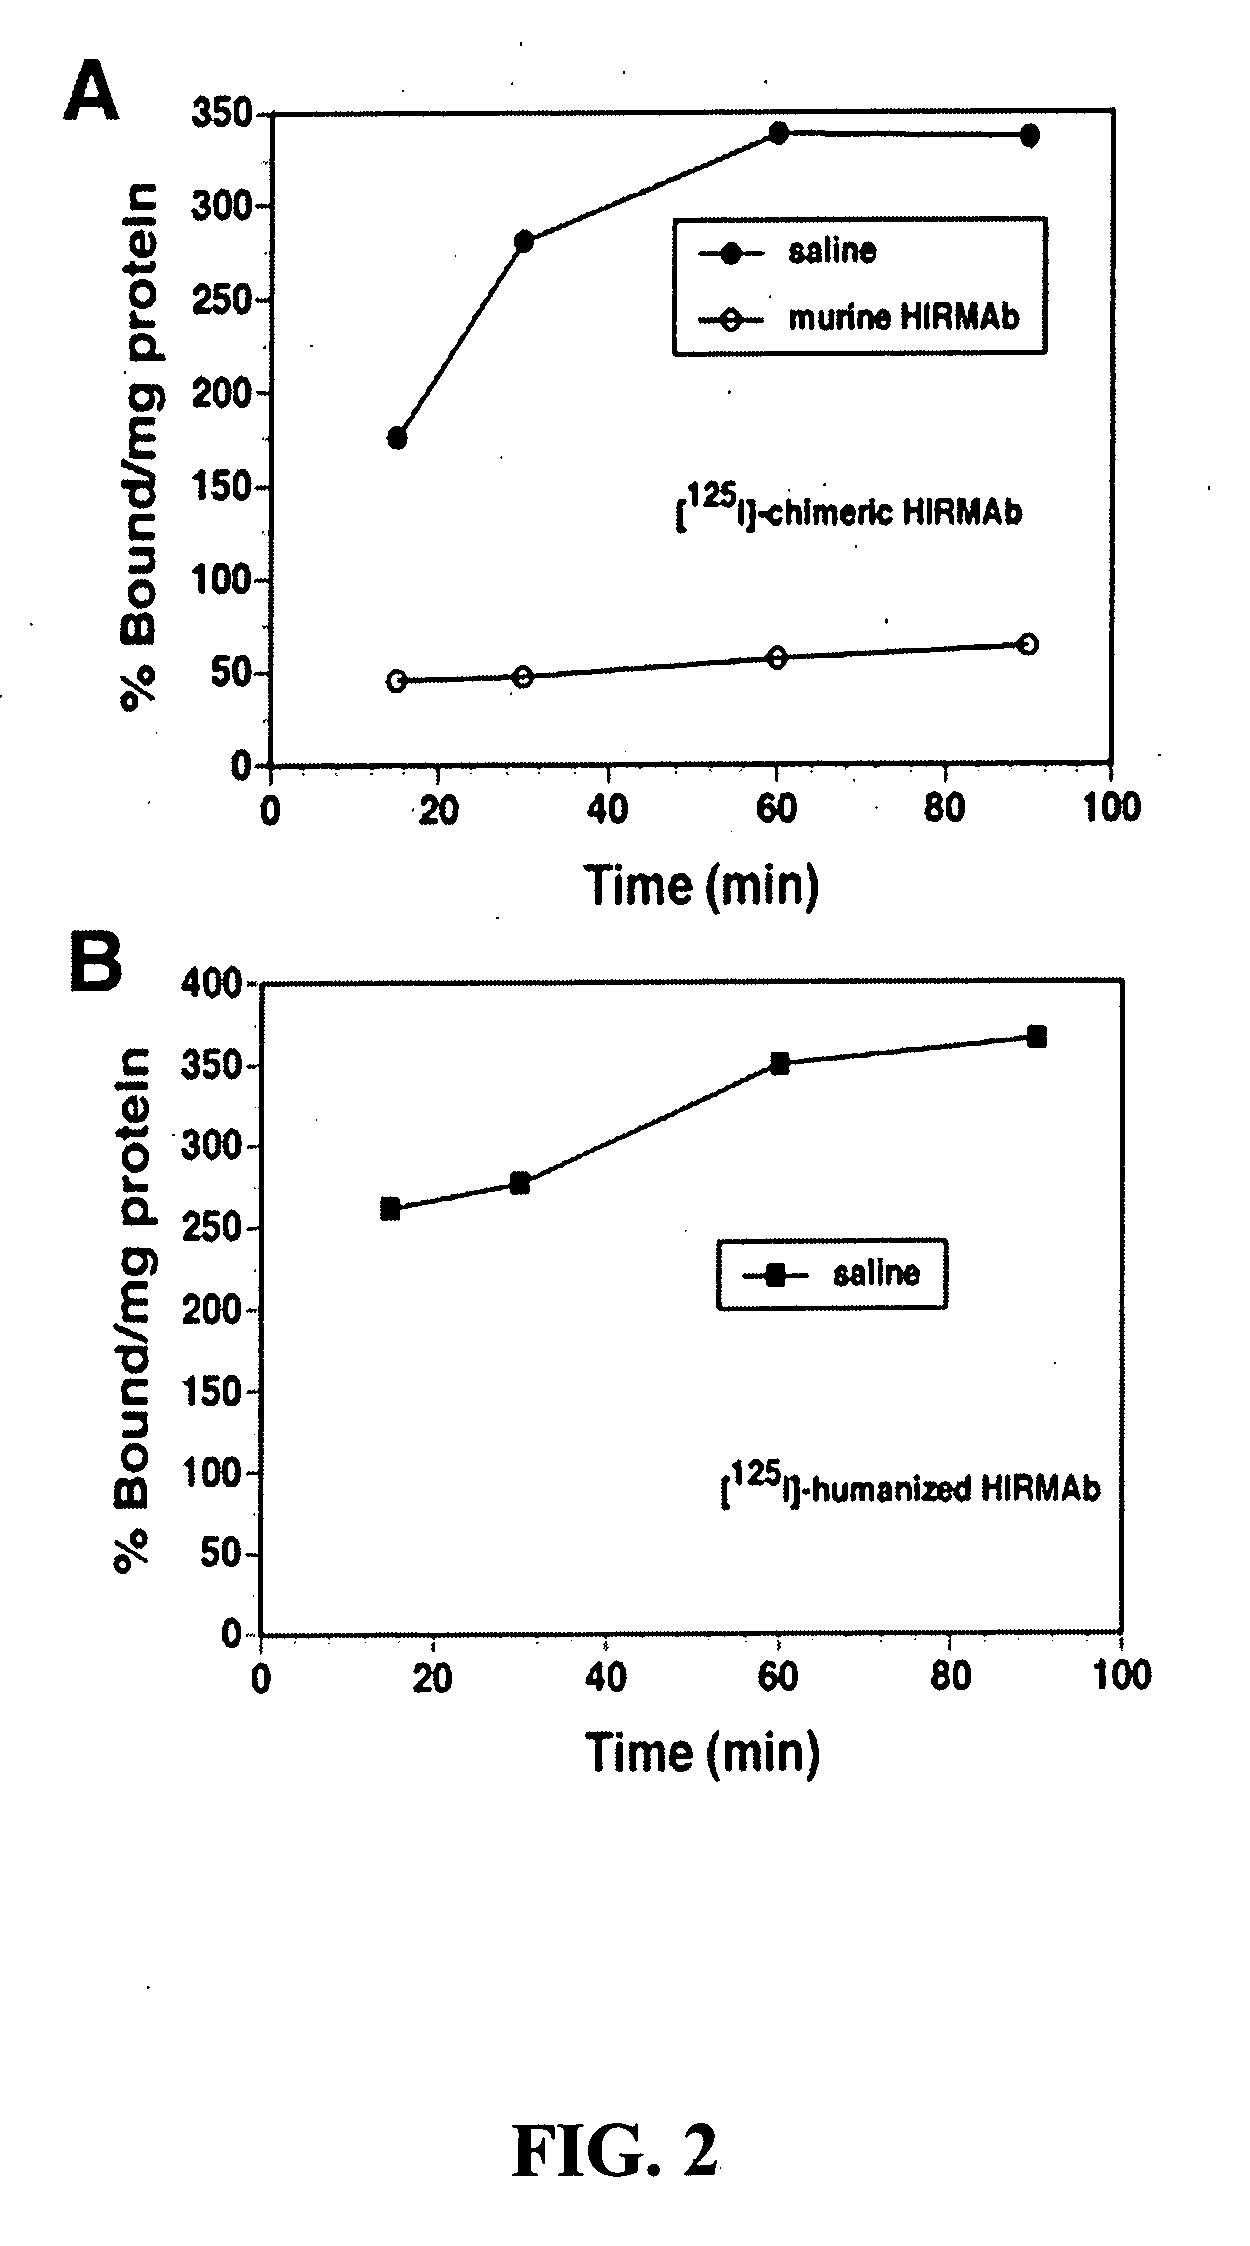 Delivery of pharmaceutical agents via the human insulin receptor